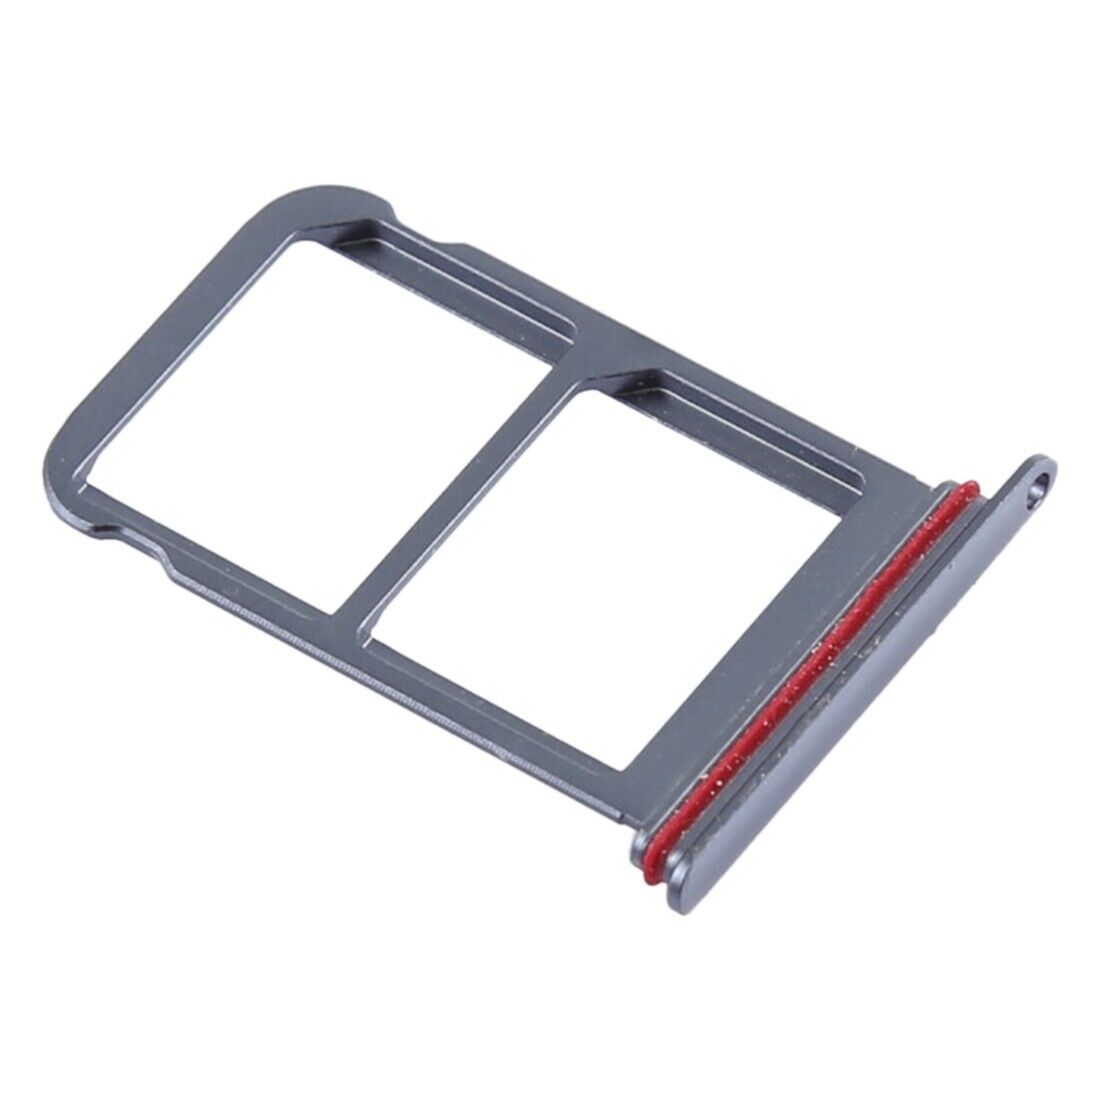 Huawei P20 Pro - Dual SIM Card Holder Tray Slot Blue & Waterproof Seal for [product_price] - First Help Tech